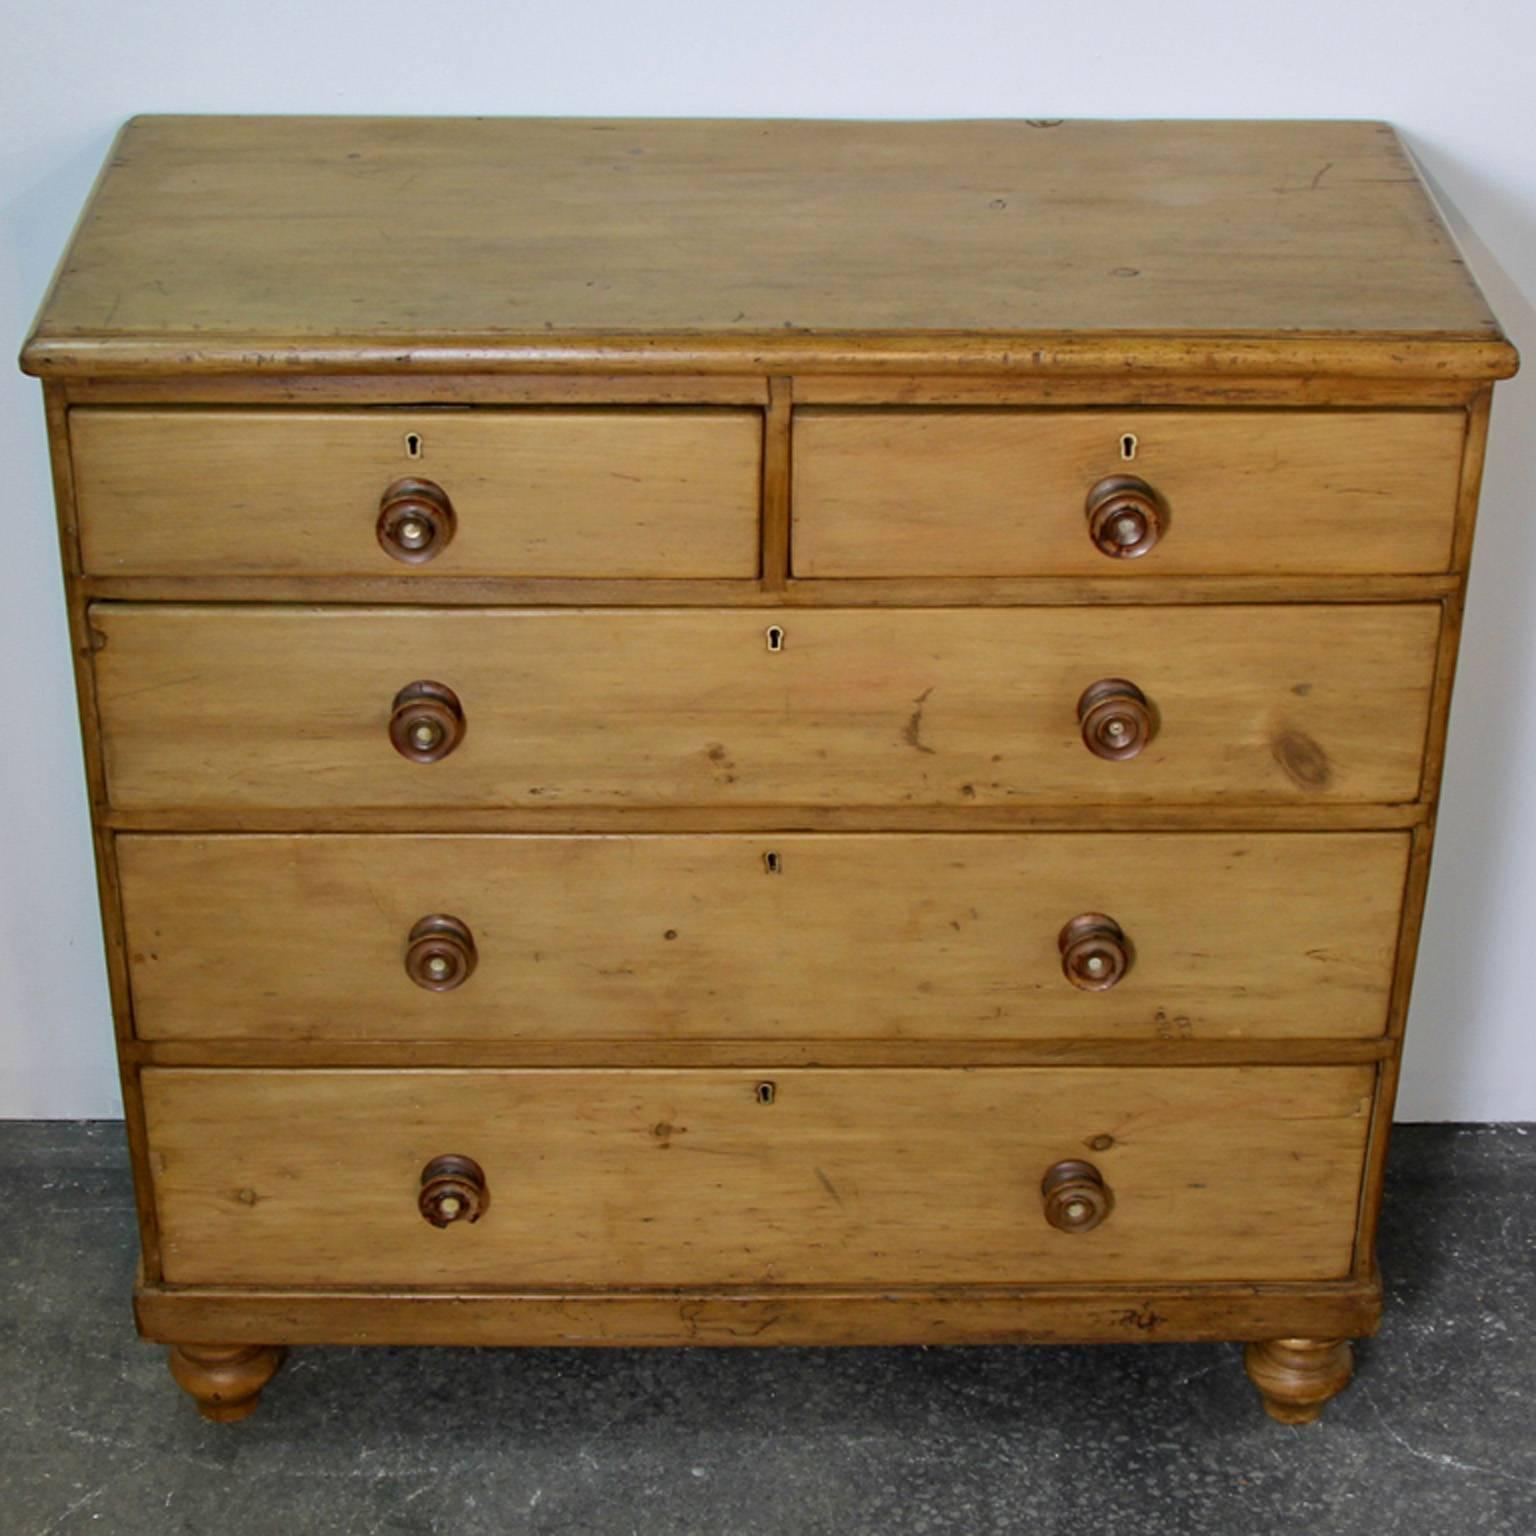 Superb English pine chest of drawers in excellent condition, circa 1880.